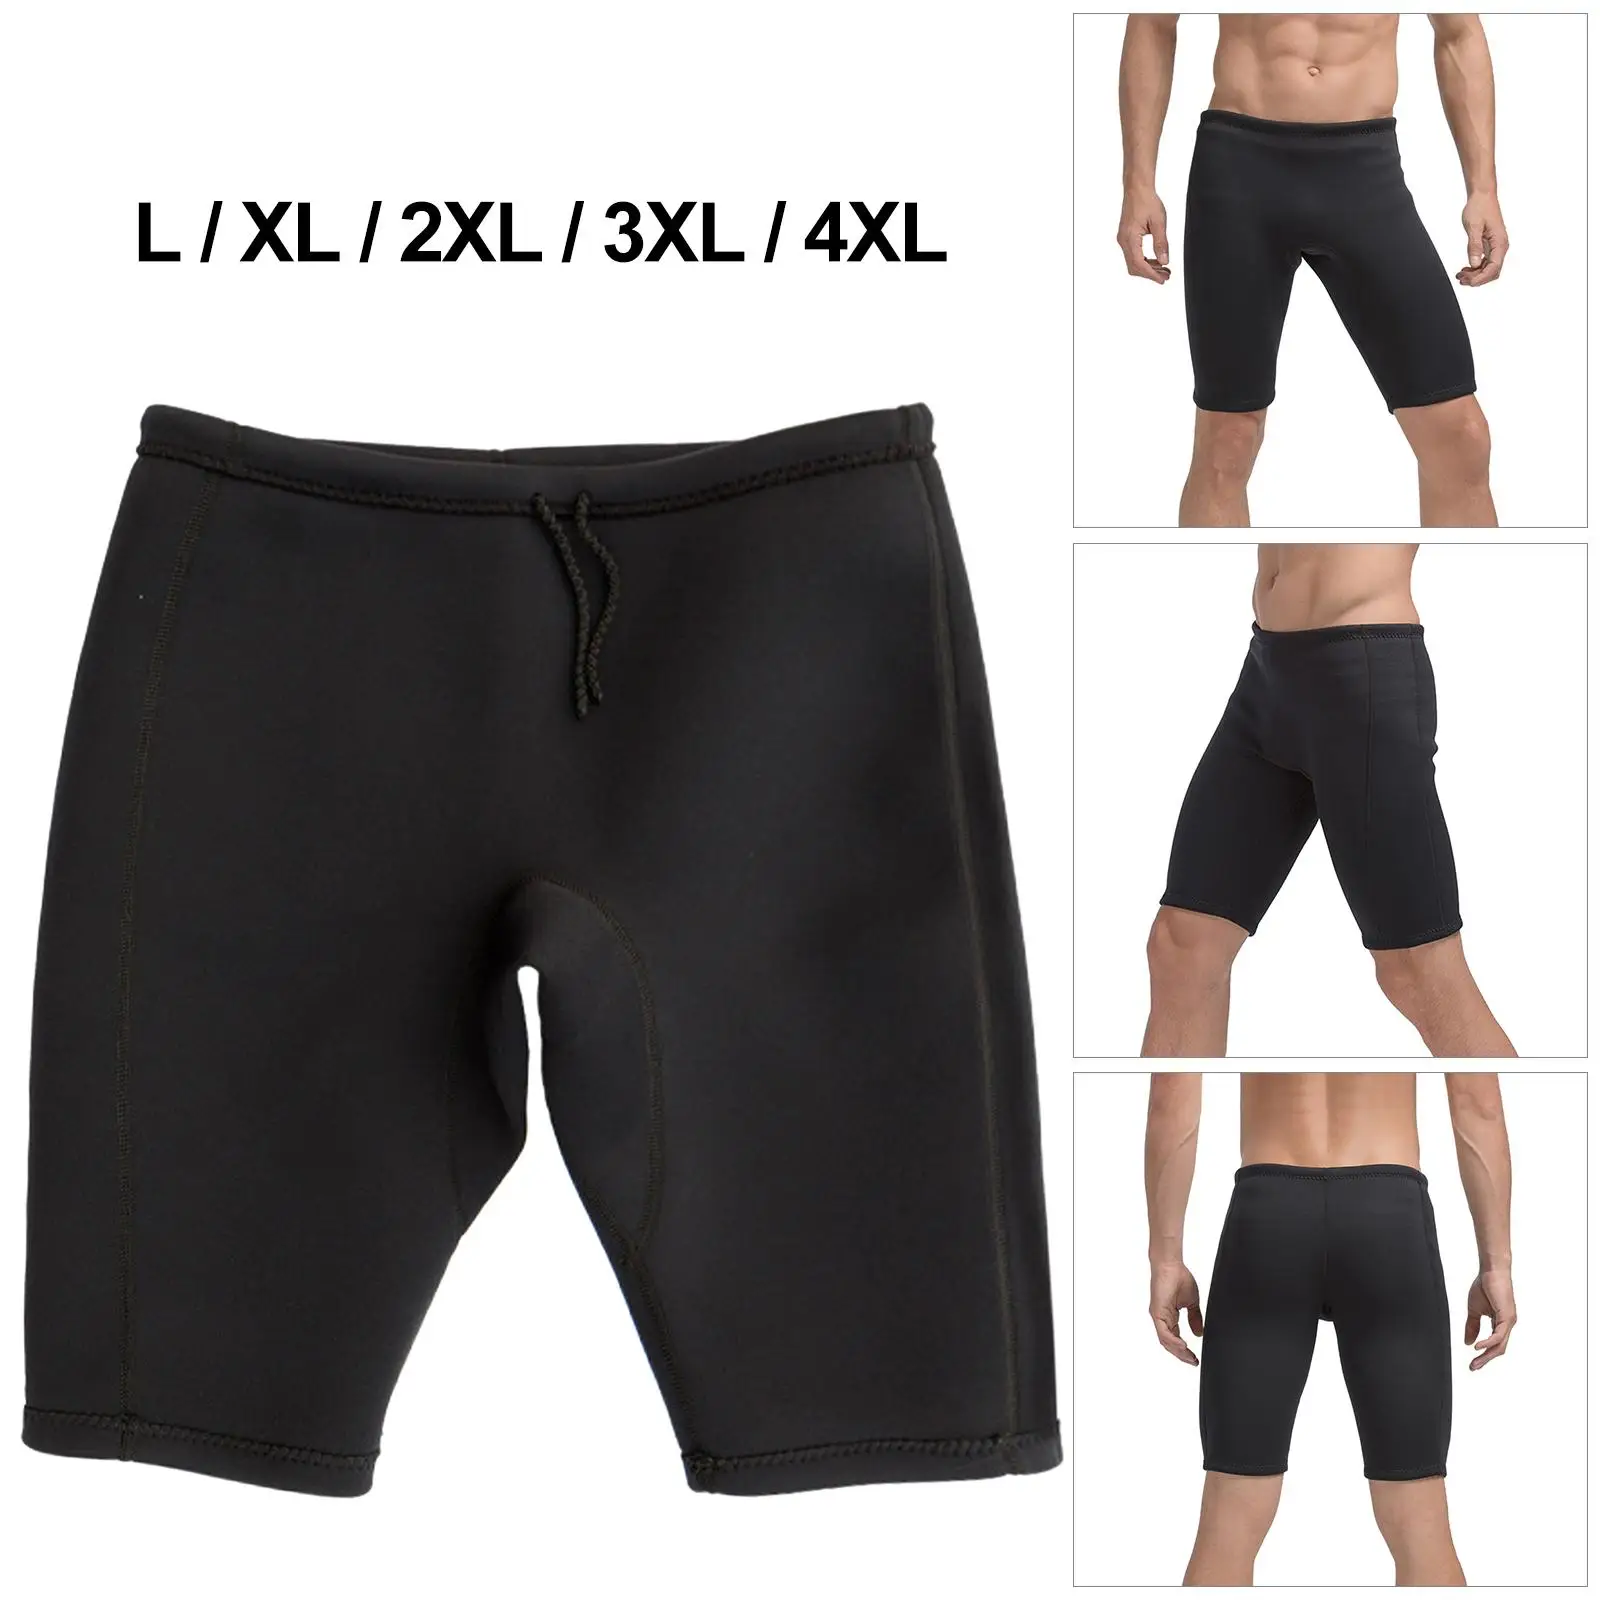 Mens Wetsuit Shorts Outdoor Swimming Pants, 3mm Neoprene Diving Wet Suit Trunks Trousers for Surfing Snorkeling  Sports